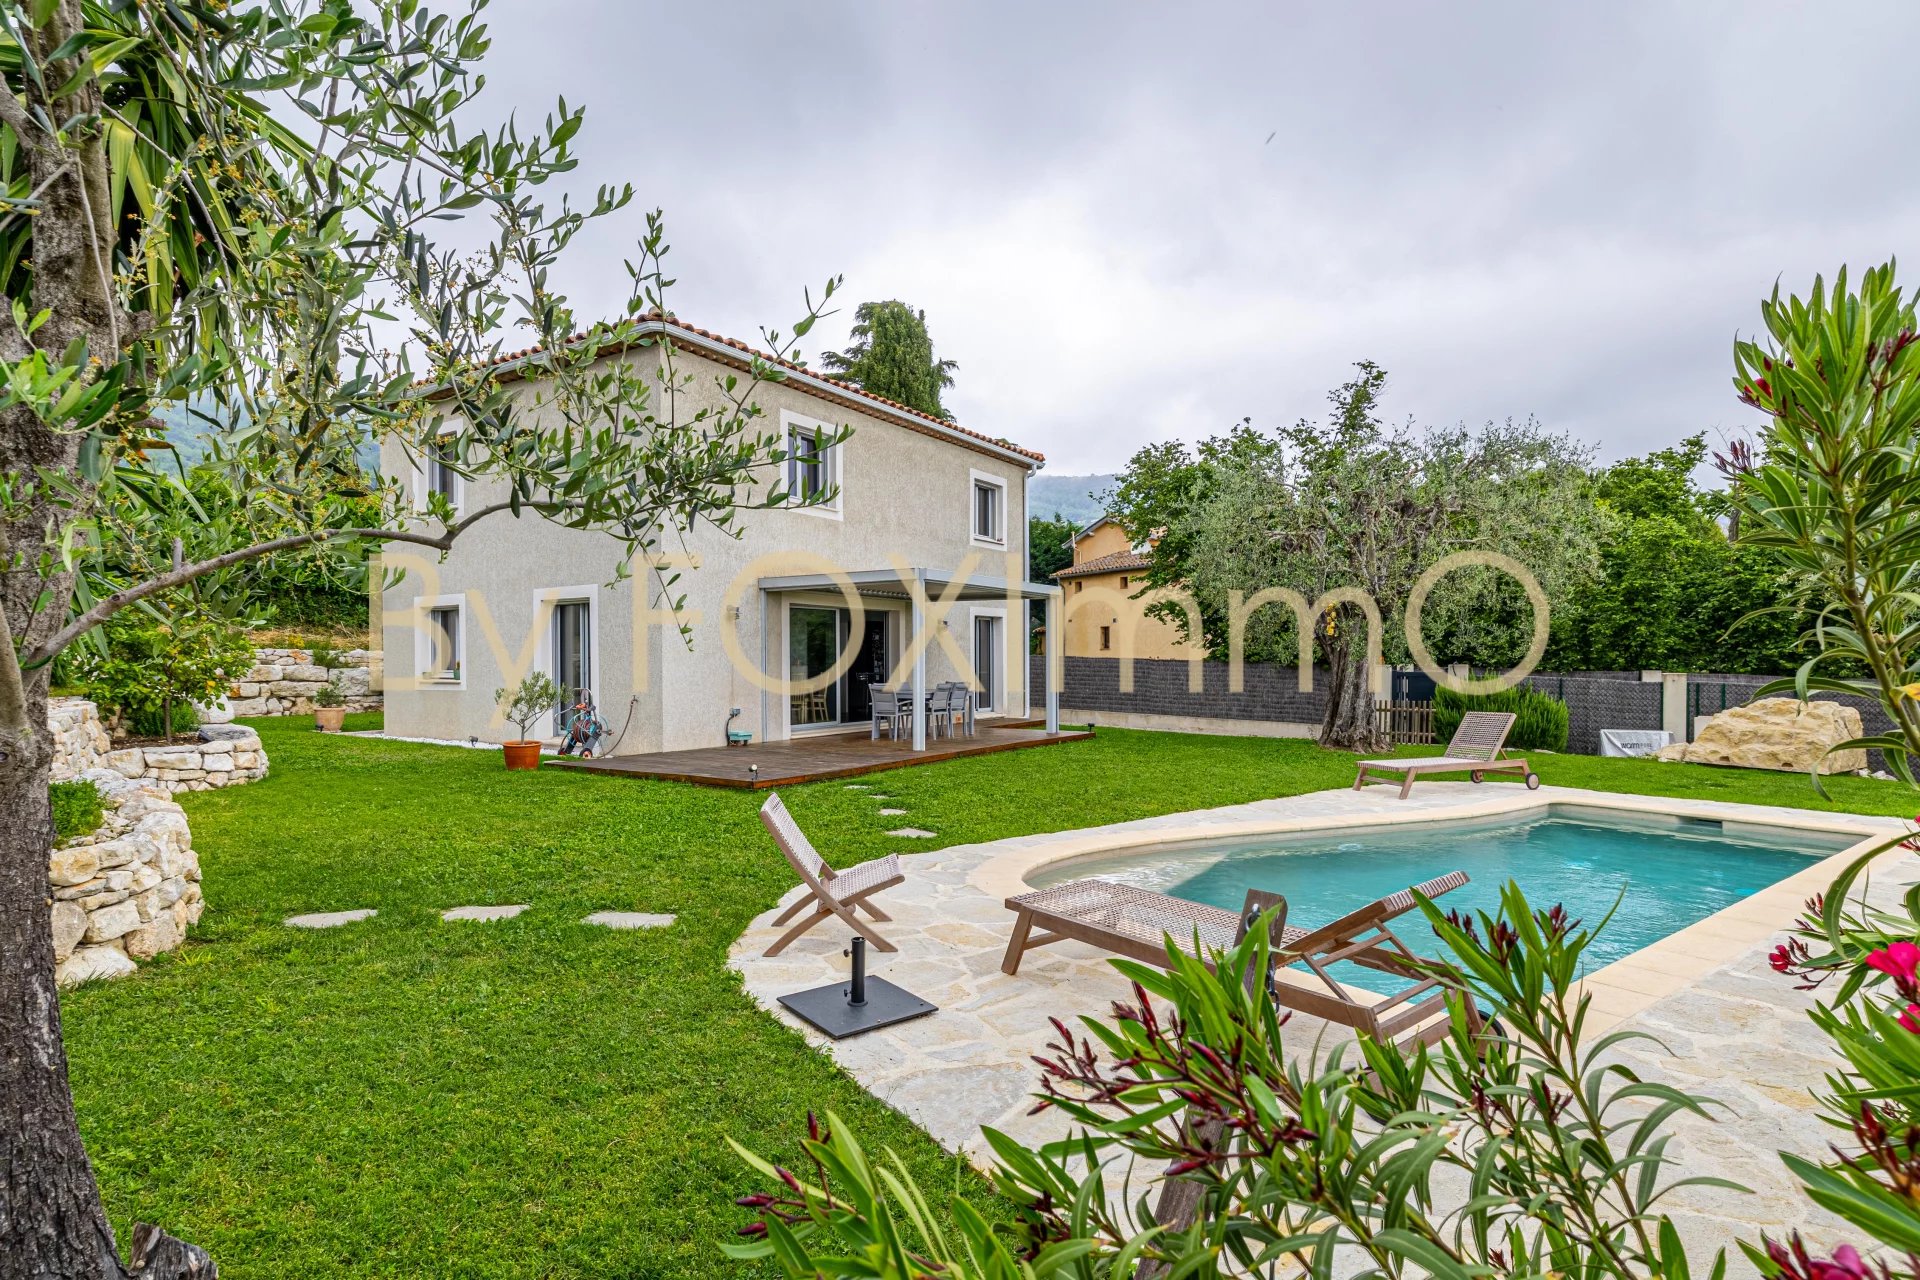 Recent villa 125 m² 5 rooms with swimming pool and garden and garage. In absolute calm